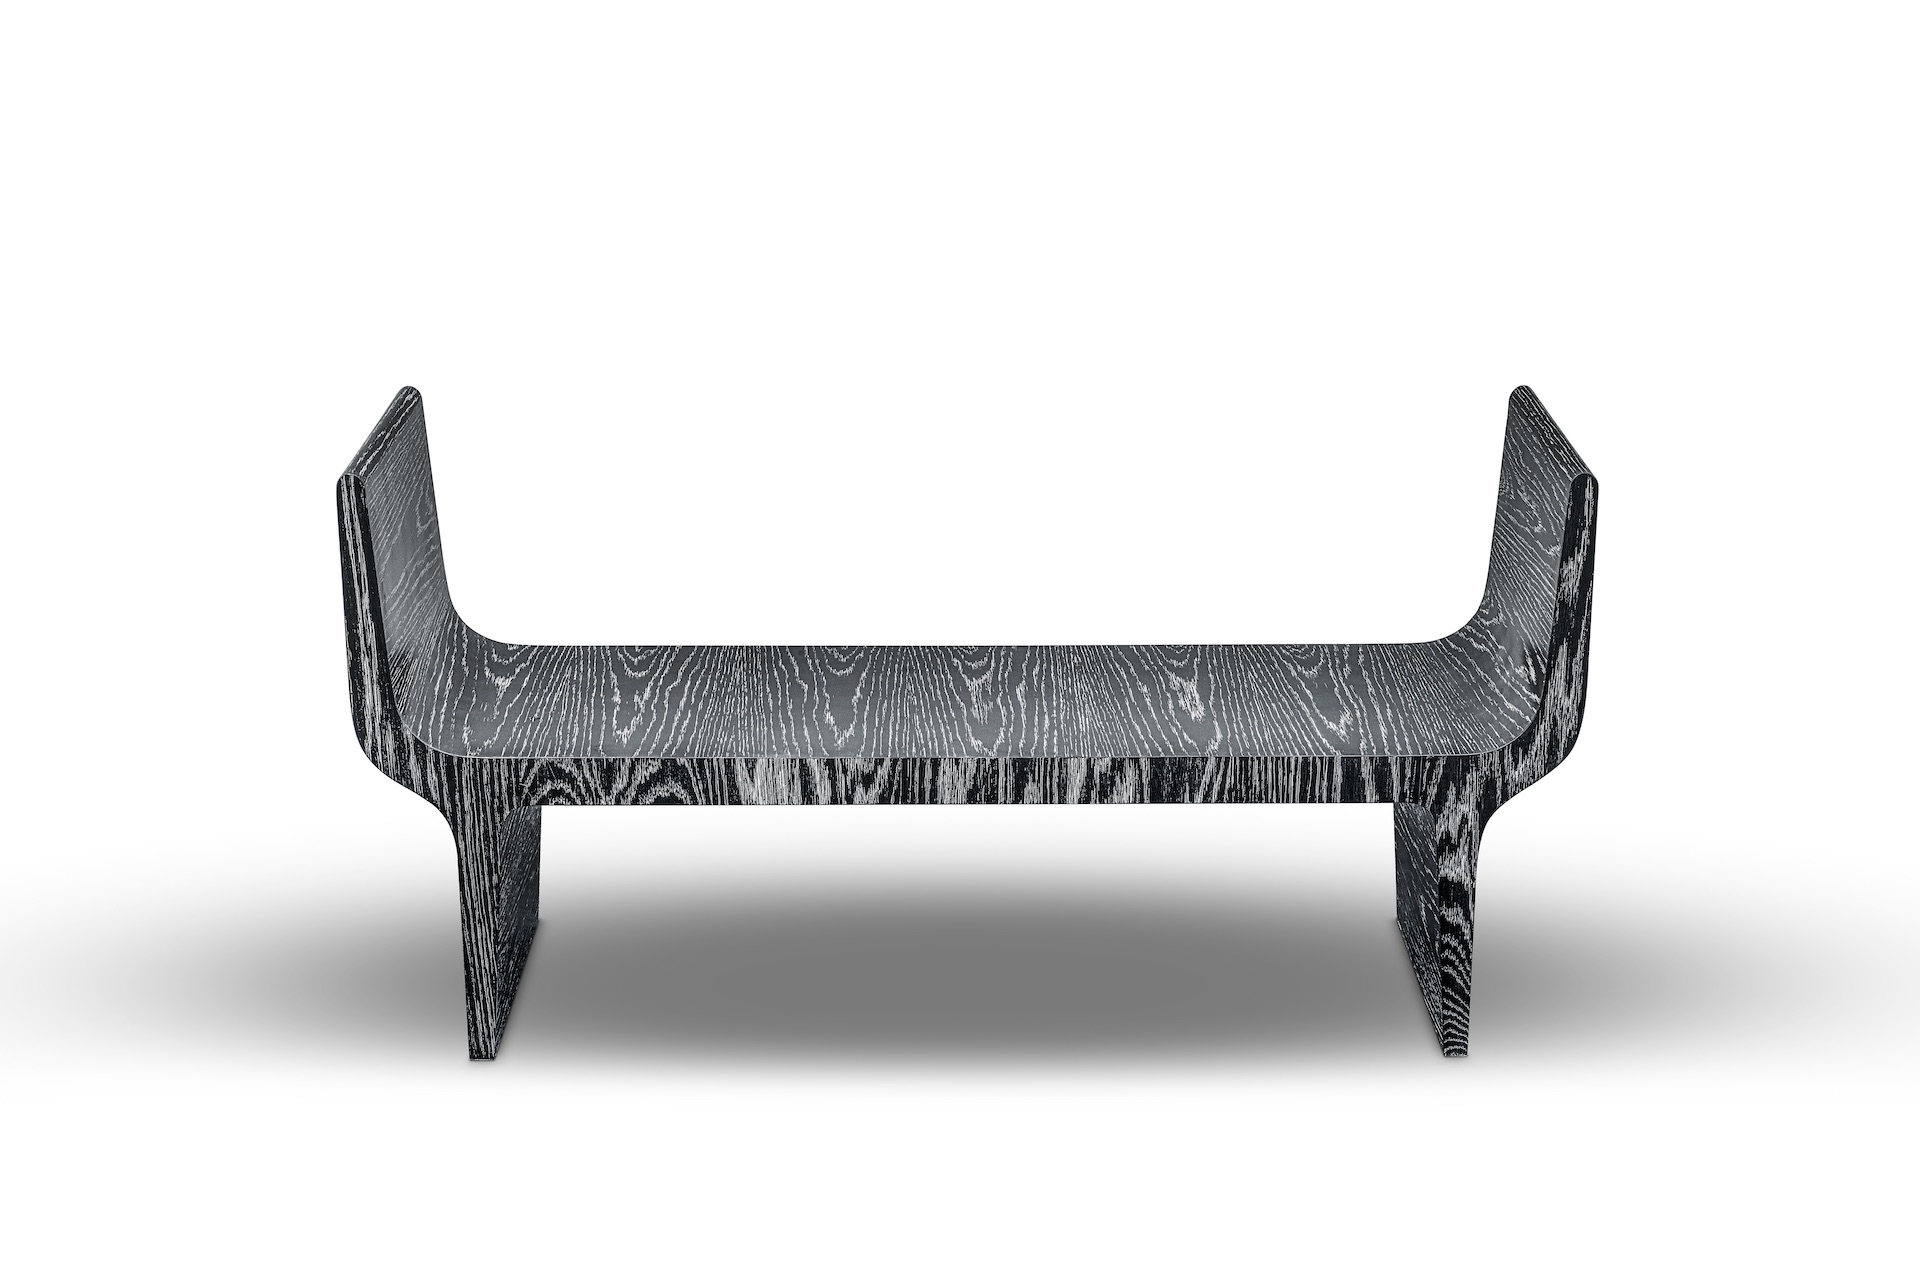 Copacabana bench features a structured limed oak. Shown with cushion in Lelievre Regate 01 fabric. Available without cushion.